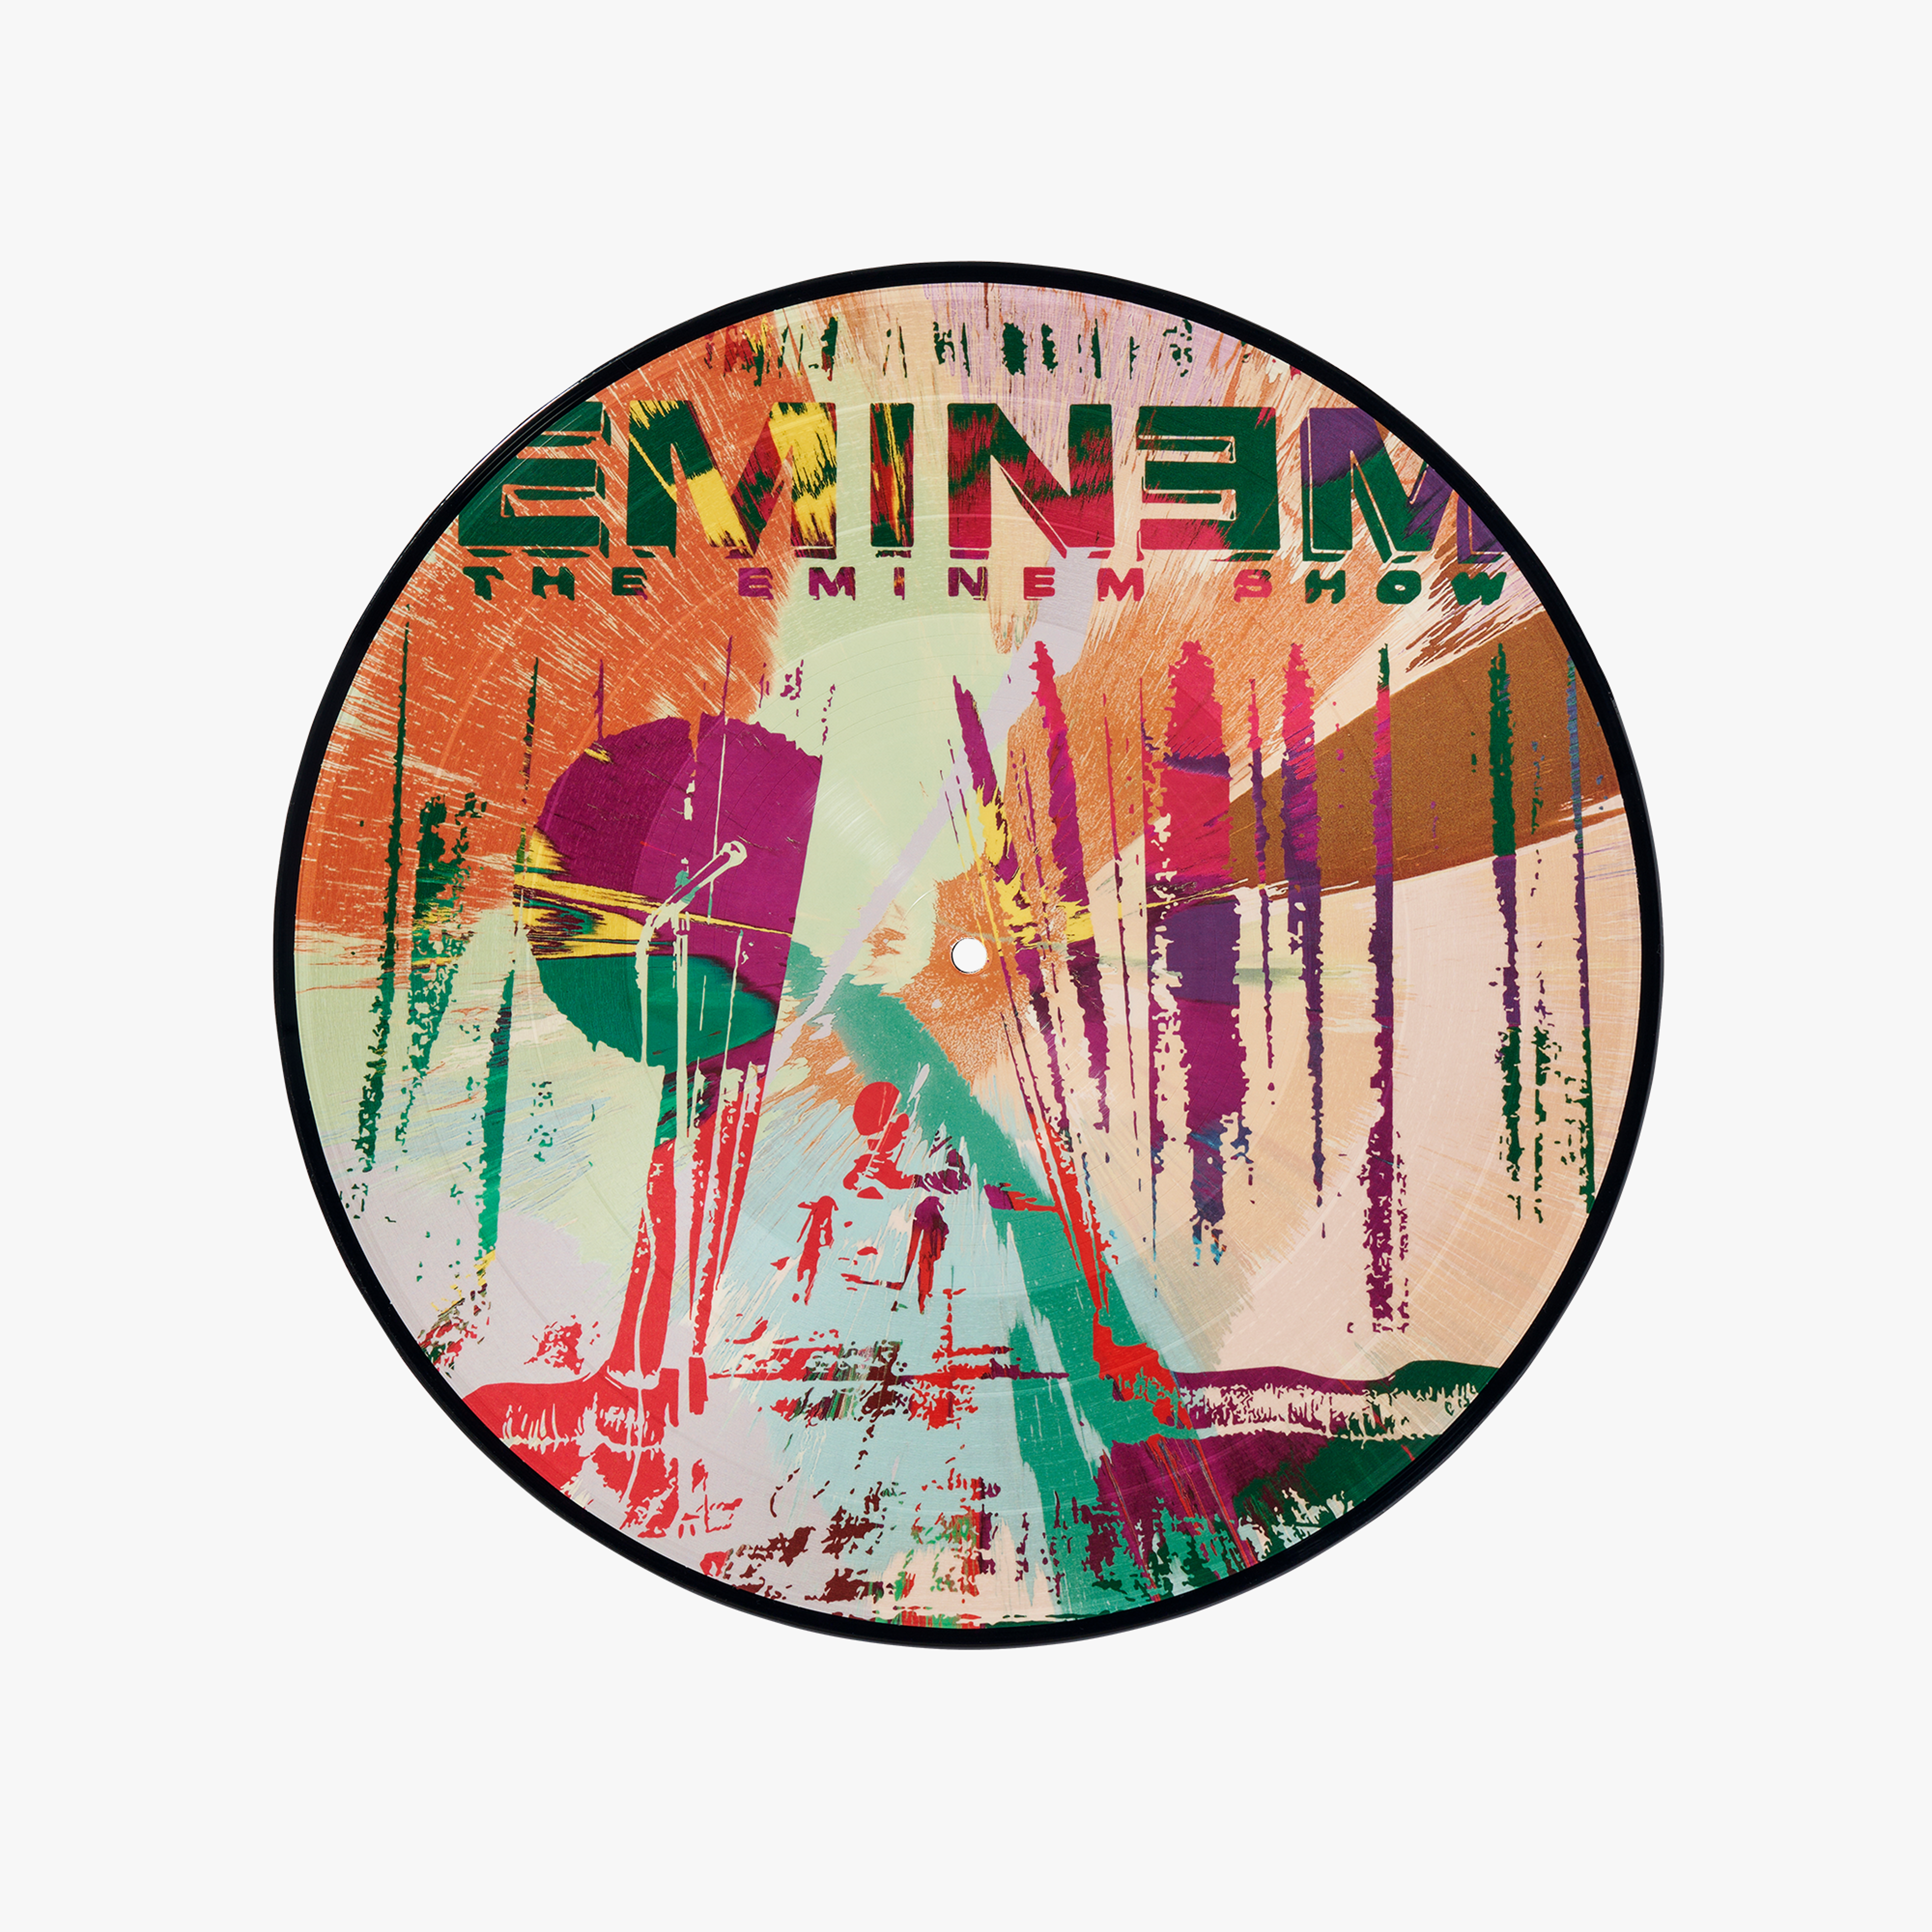 Alternate View 3 of Eminem - The Eminem Show by Damien Hirst Gallery Picture Disc